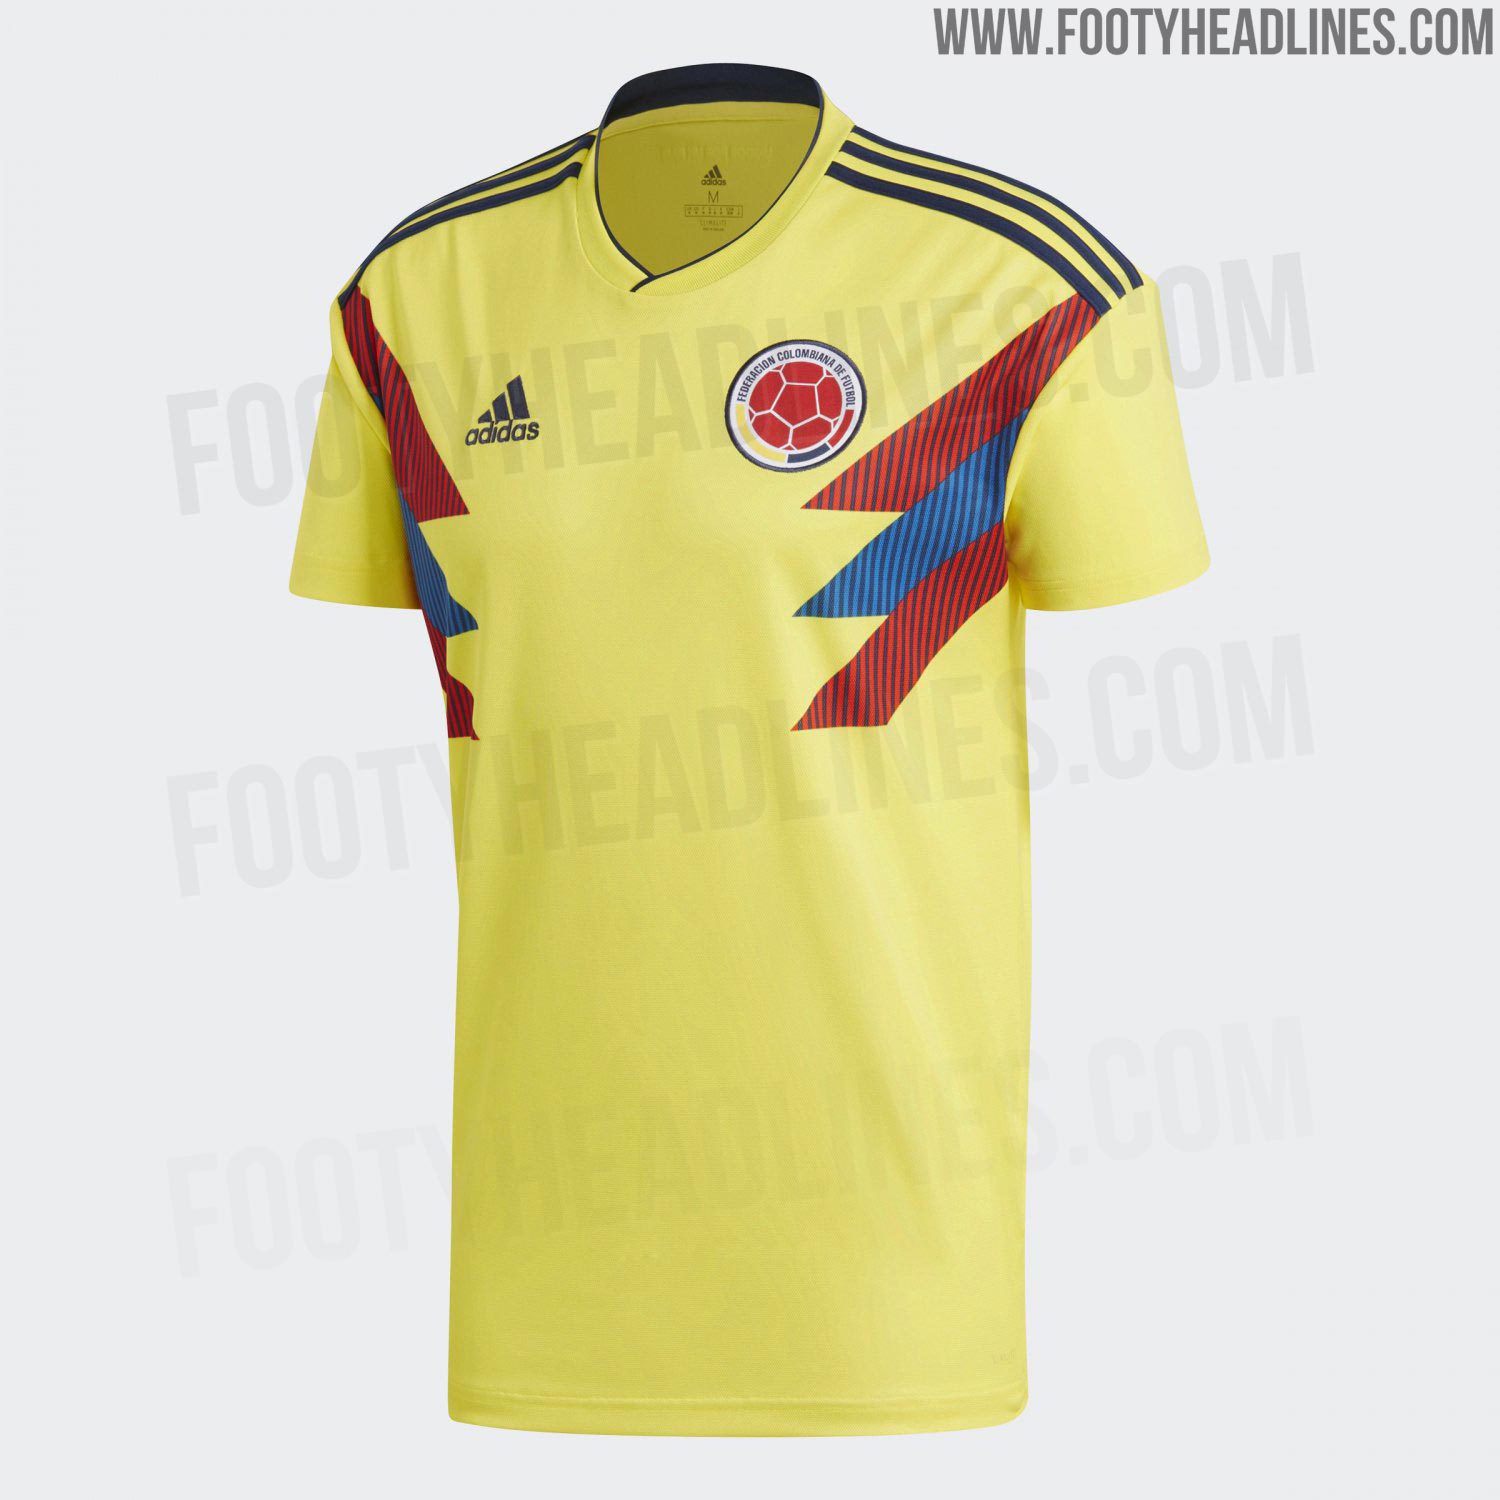 Colombia 2018 World Cup Kit Released - Headlines